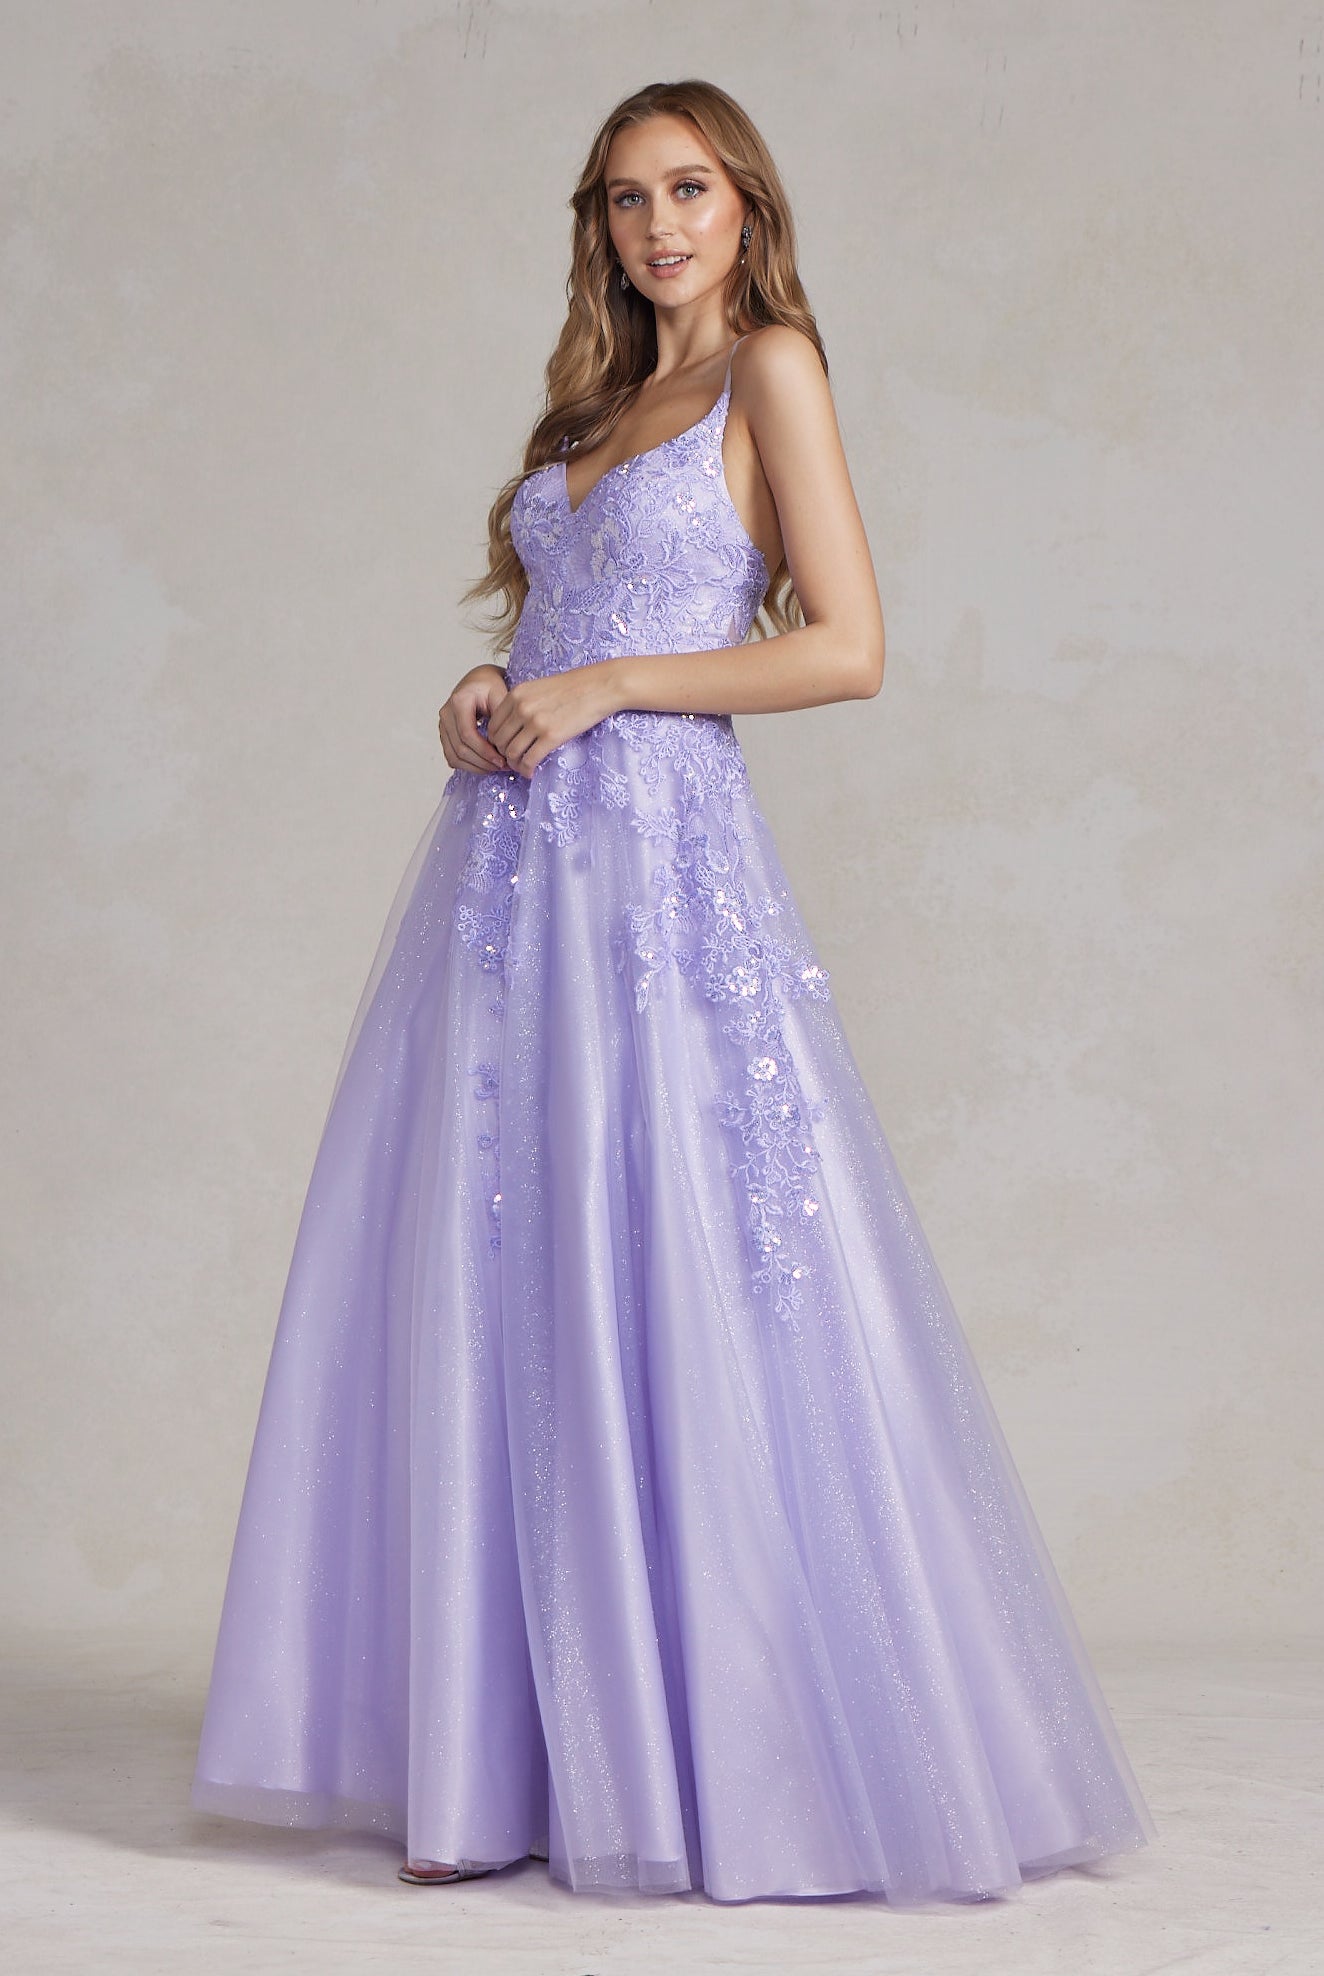 A-Line Embroidered Lace Open Criss Cross Back Long Prom Dress NXE1178-Prom Dress-smcfashion.com